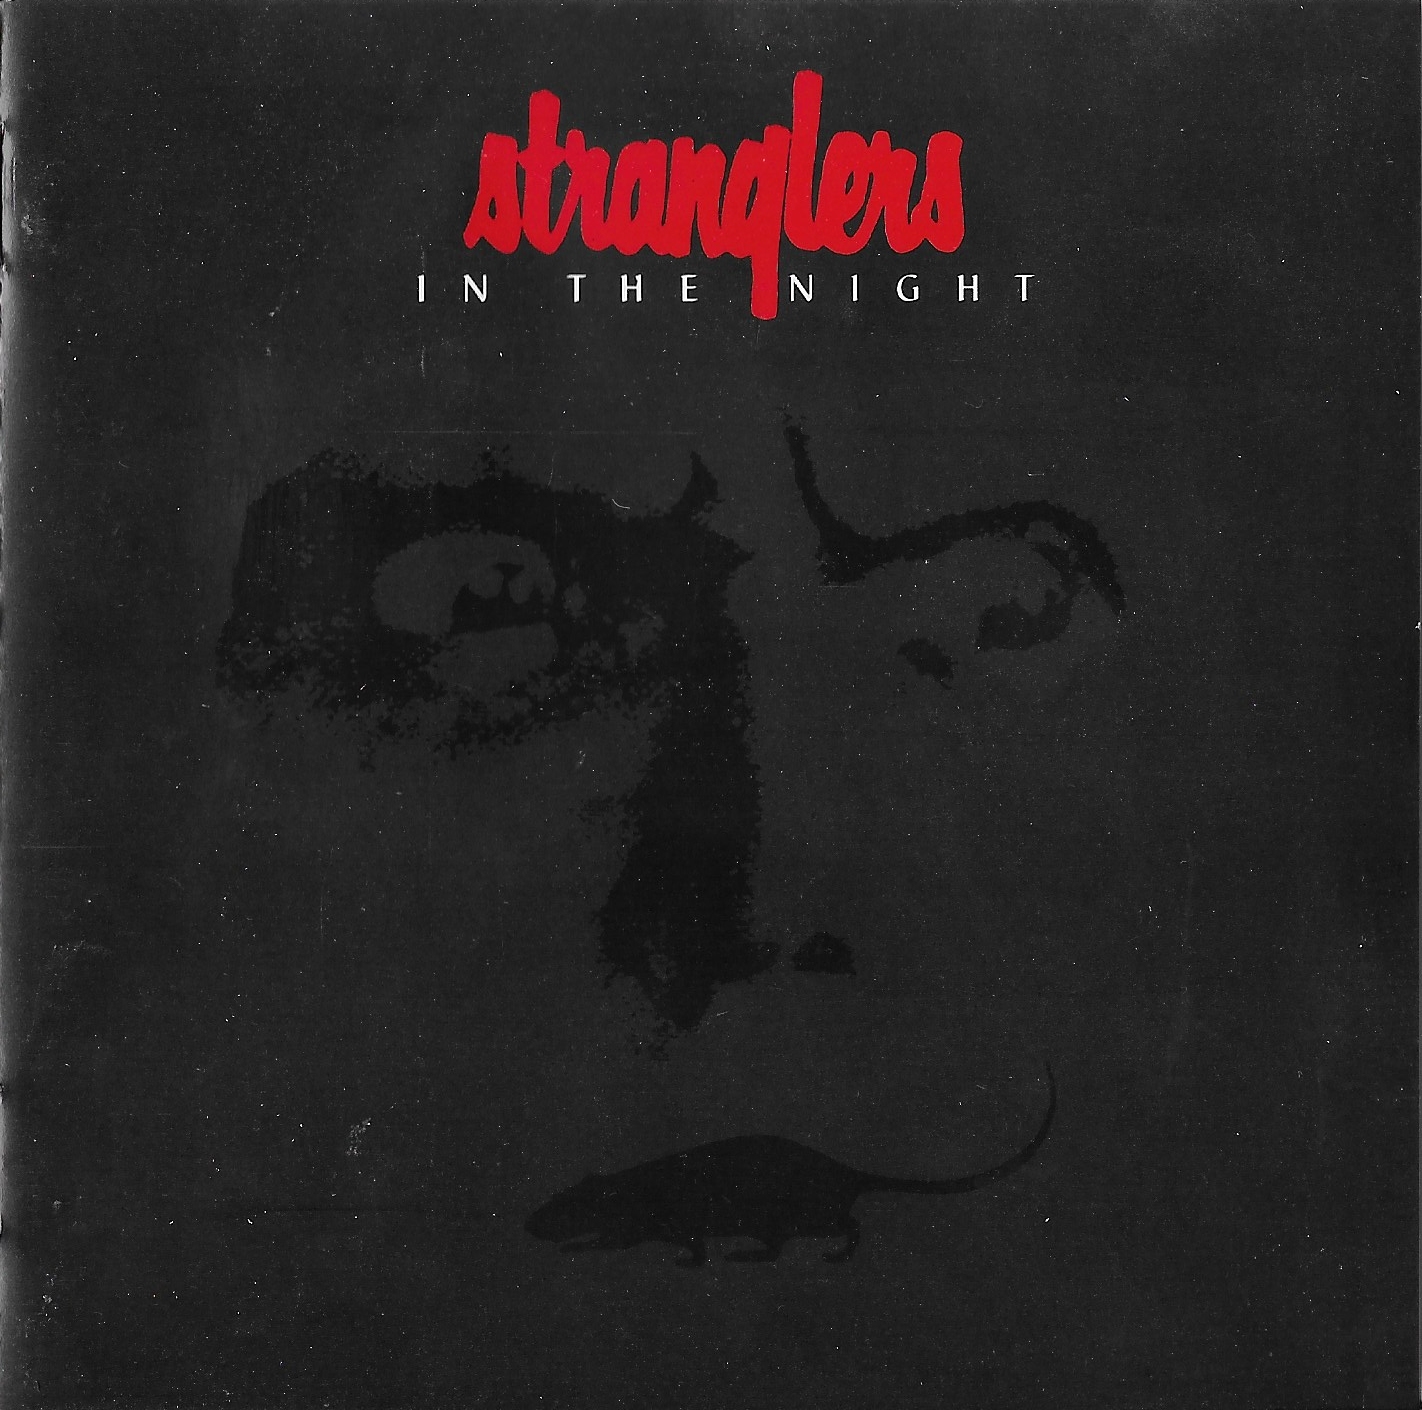 Picture of WOLCD 1030 Stranglers in the night by artist The Stranglers 